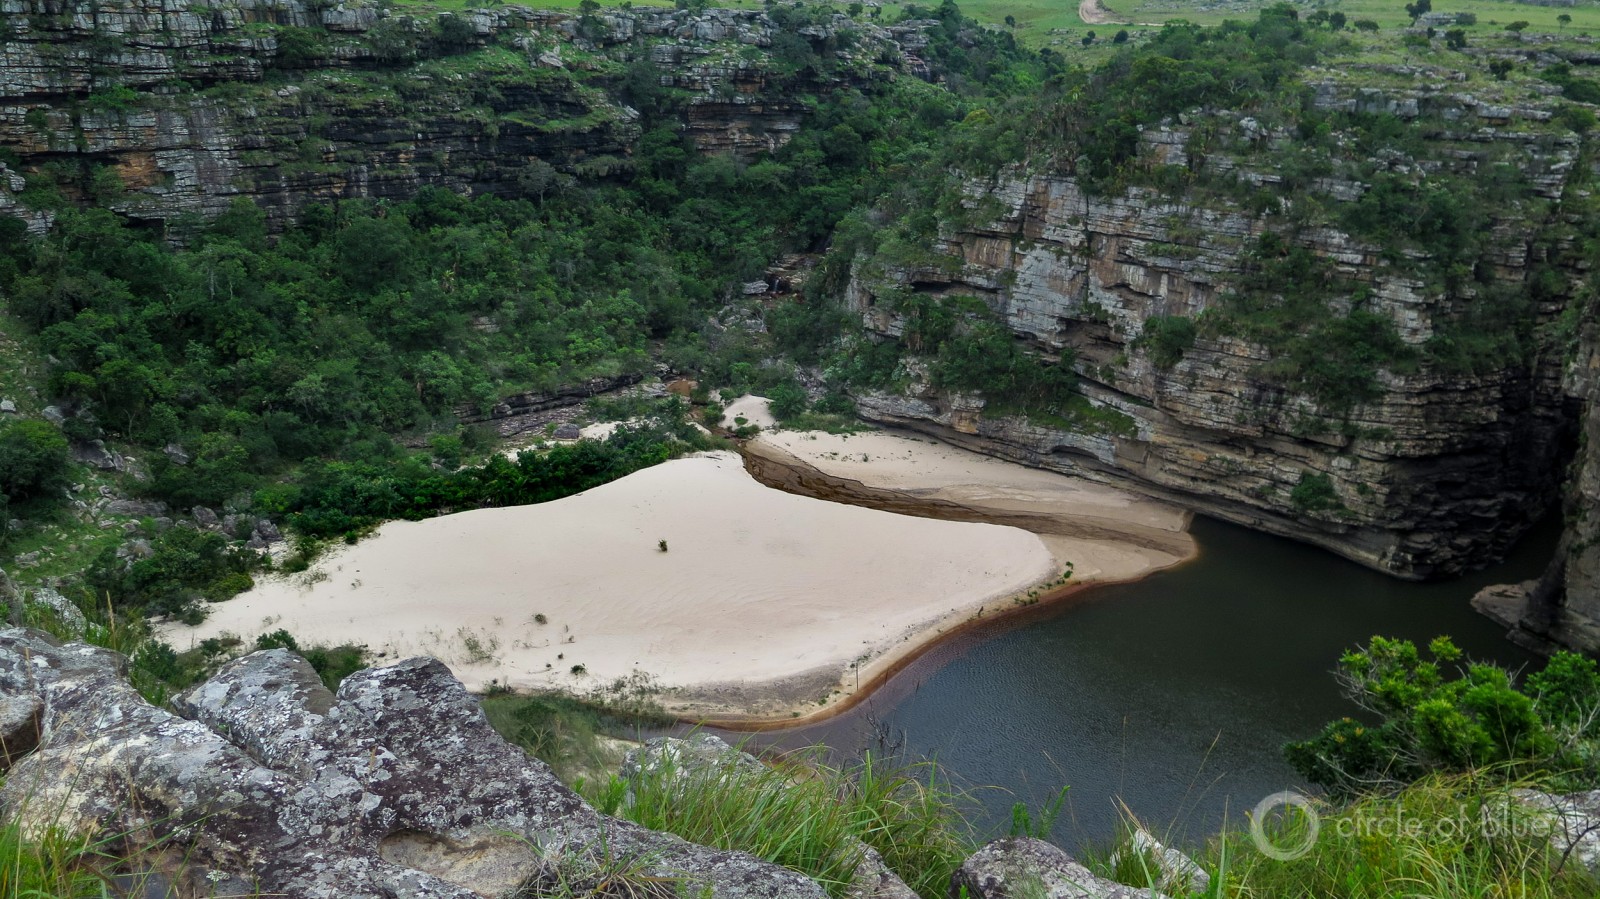 Pondoland is one of the Earth’s stupendously beautiful places. Its sheer basalt cliffs drop straight into deep gorges and the blue waters of the Indian Ocean. Miles of mineral sand beaches attract waves of shore birds and schools of fish. Photo © Keith Schneider / Circle of Blue